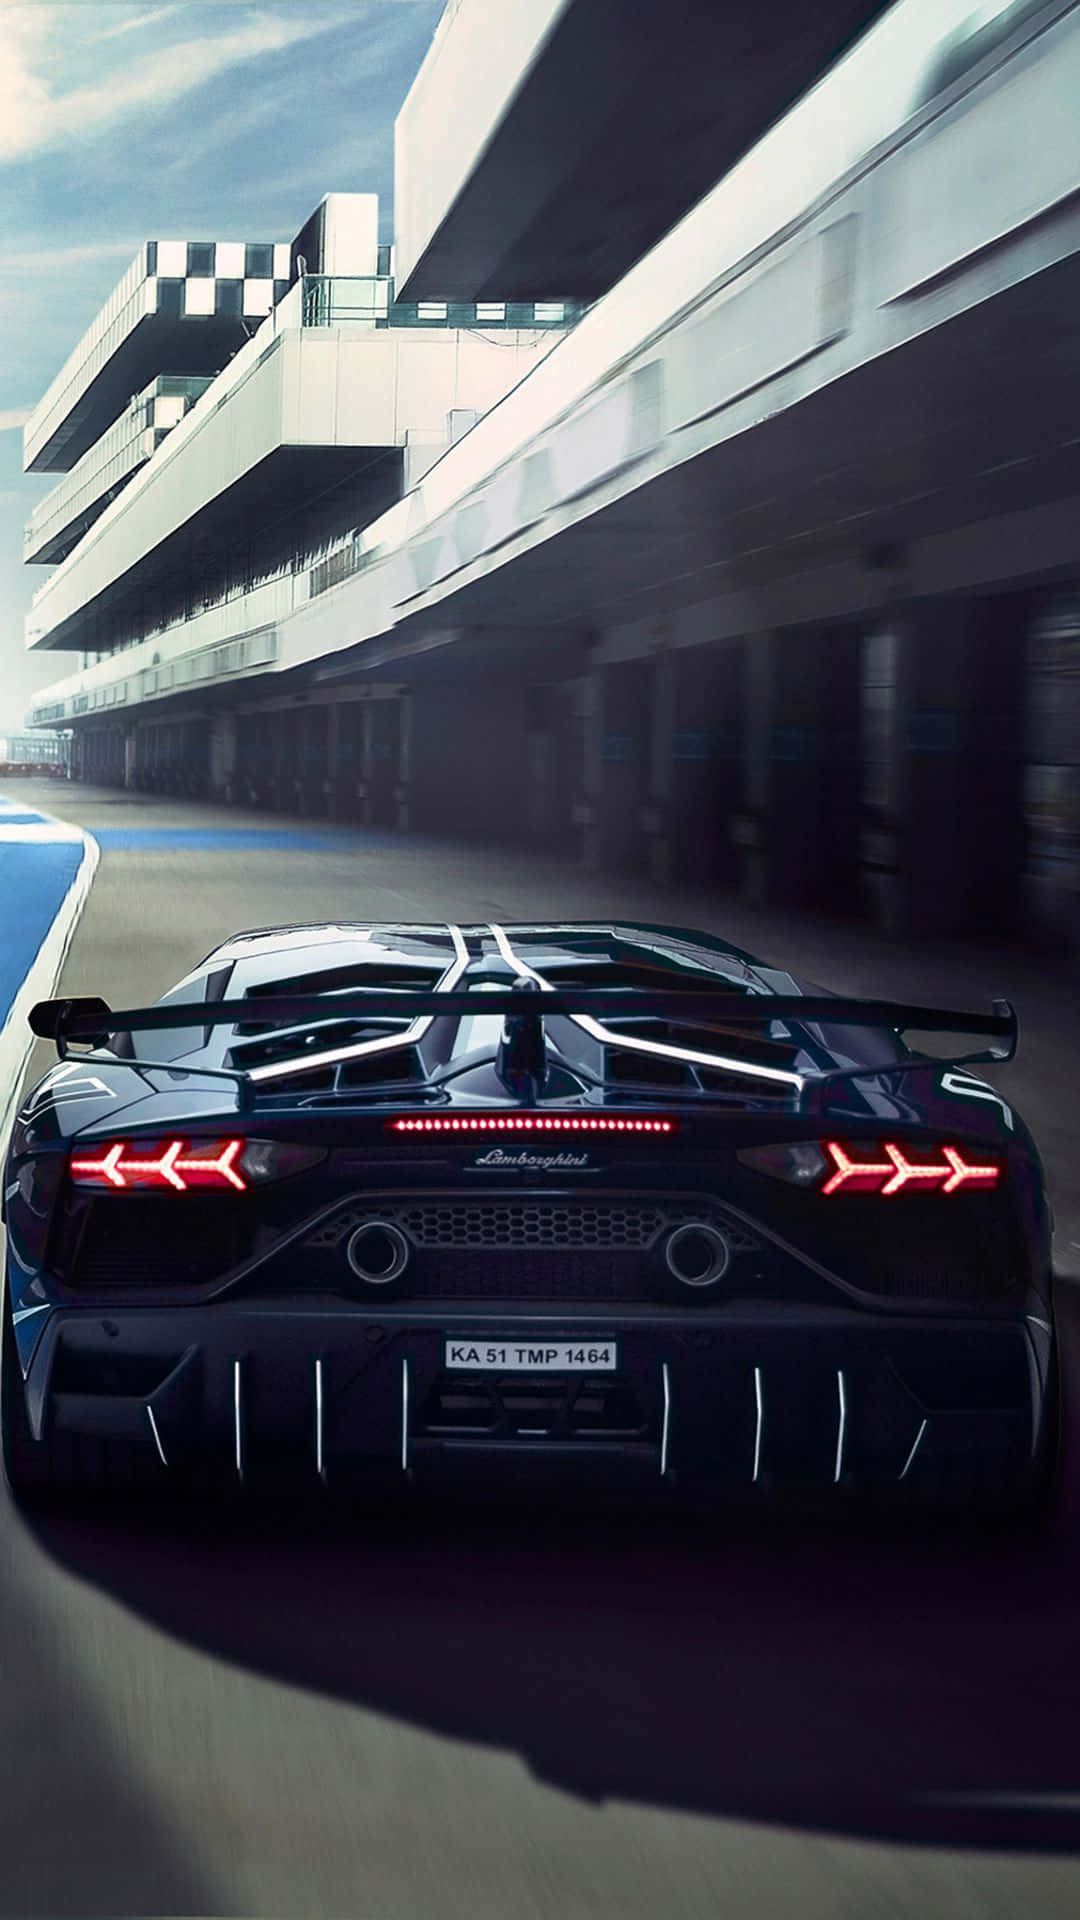 Experiencing Luxury With The Lamborghini Phone Wallpaper